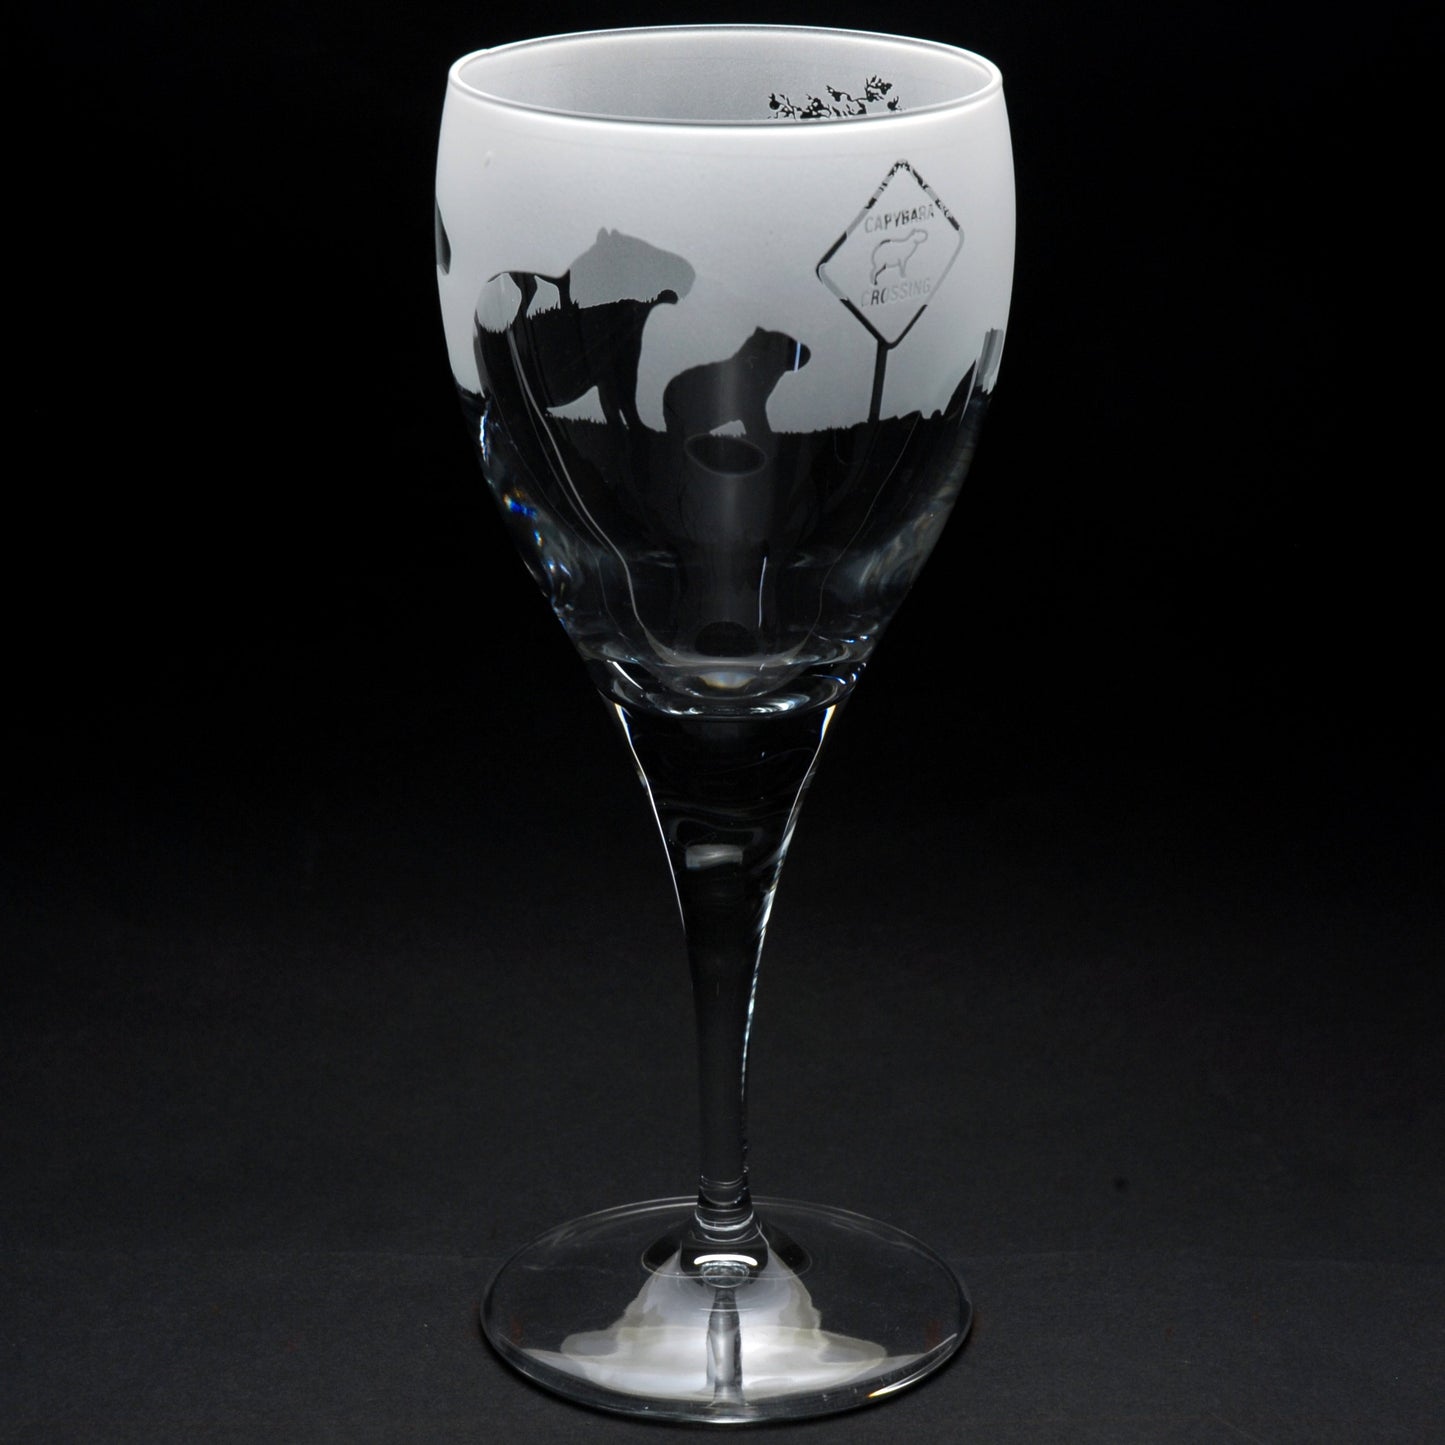 Capybara Crystal Wine Glass - Hand Etched/Engraved Gift